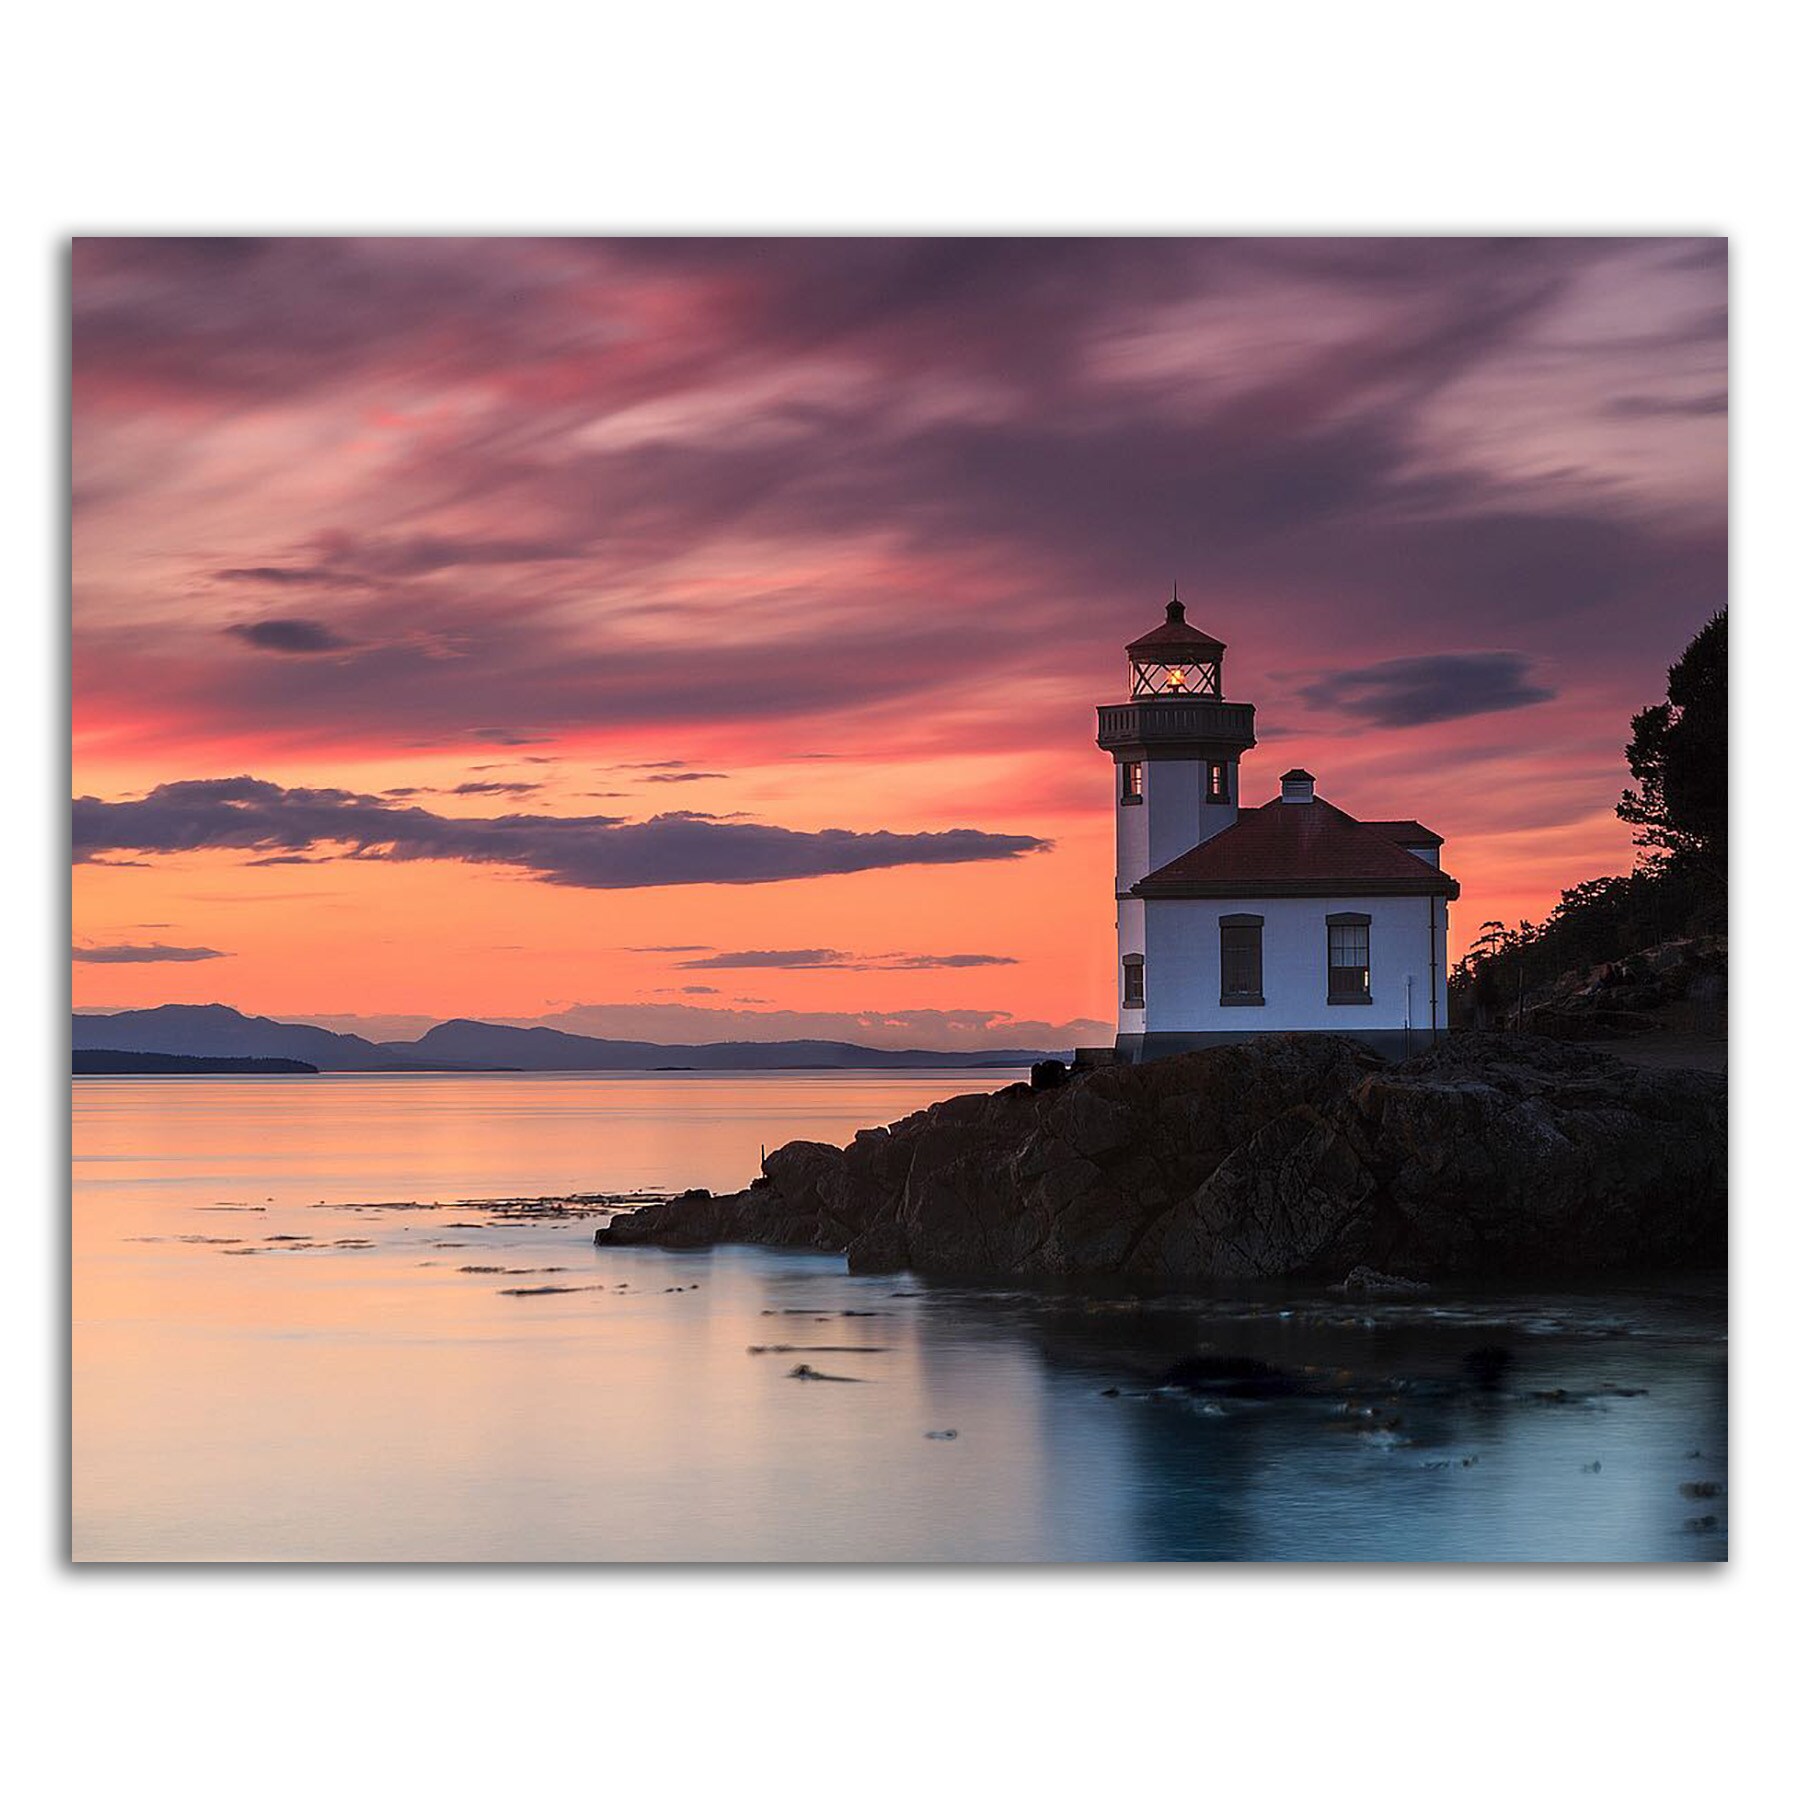 Lighthouse at Sea at Sunset Printed Picture Photo Roller Window Blind Blackout 